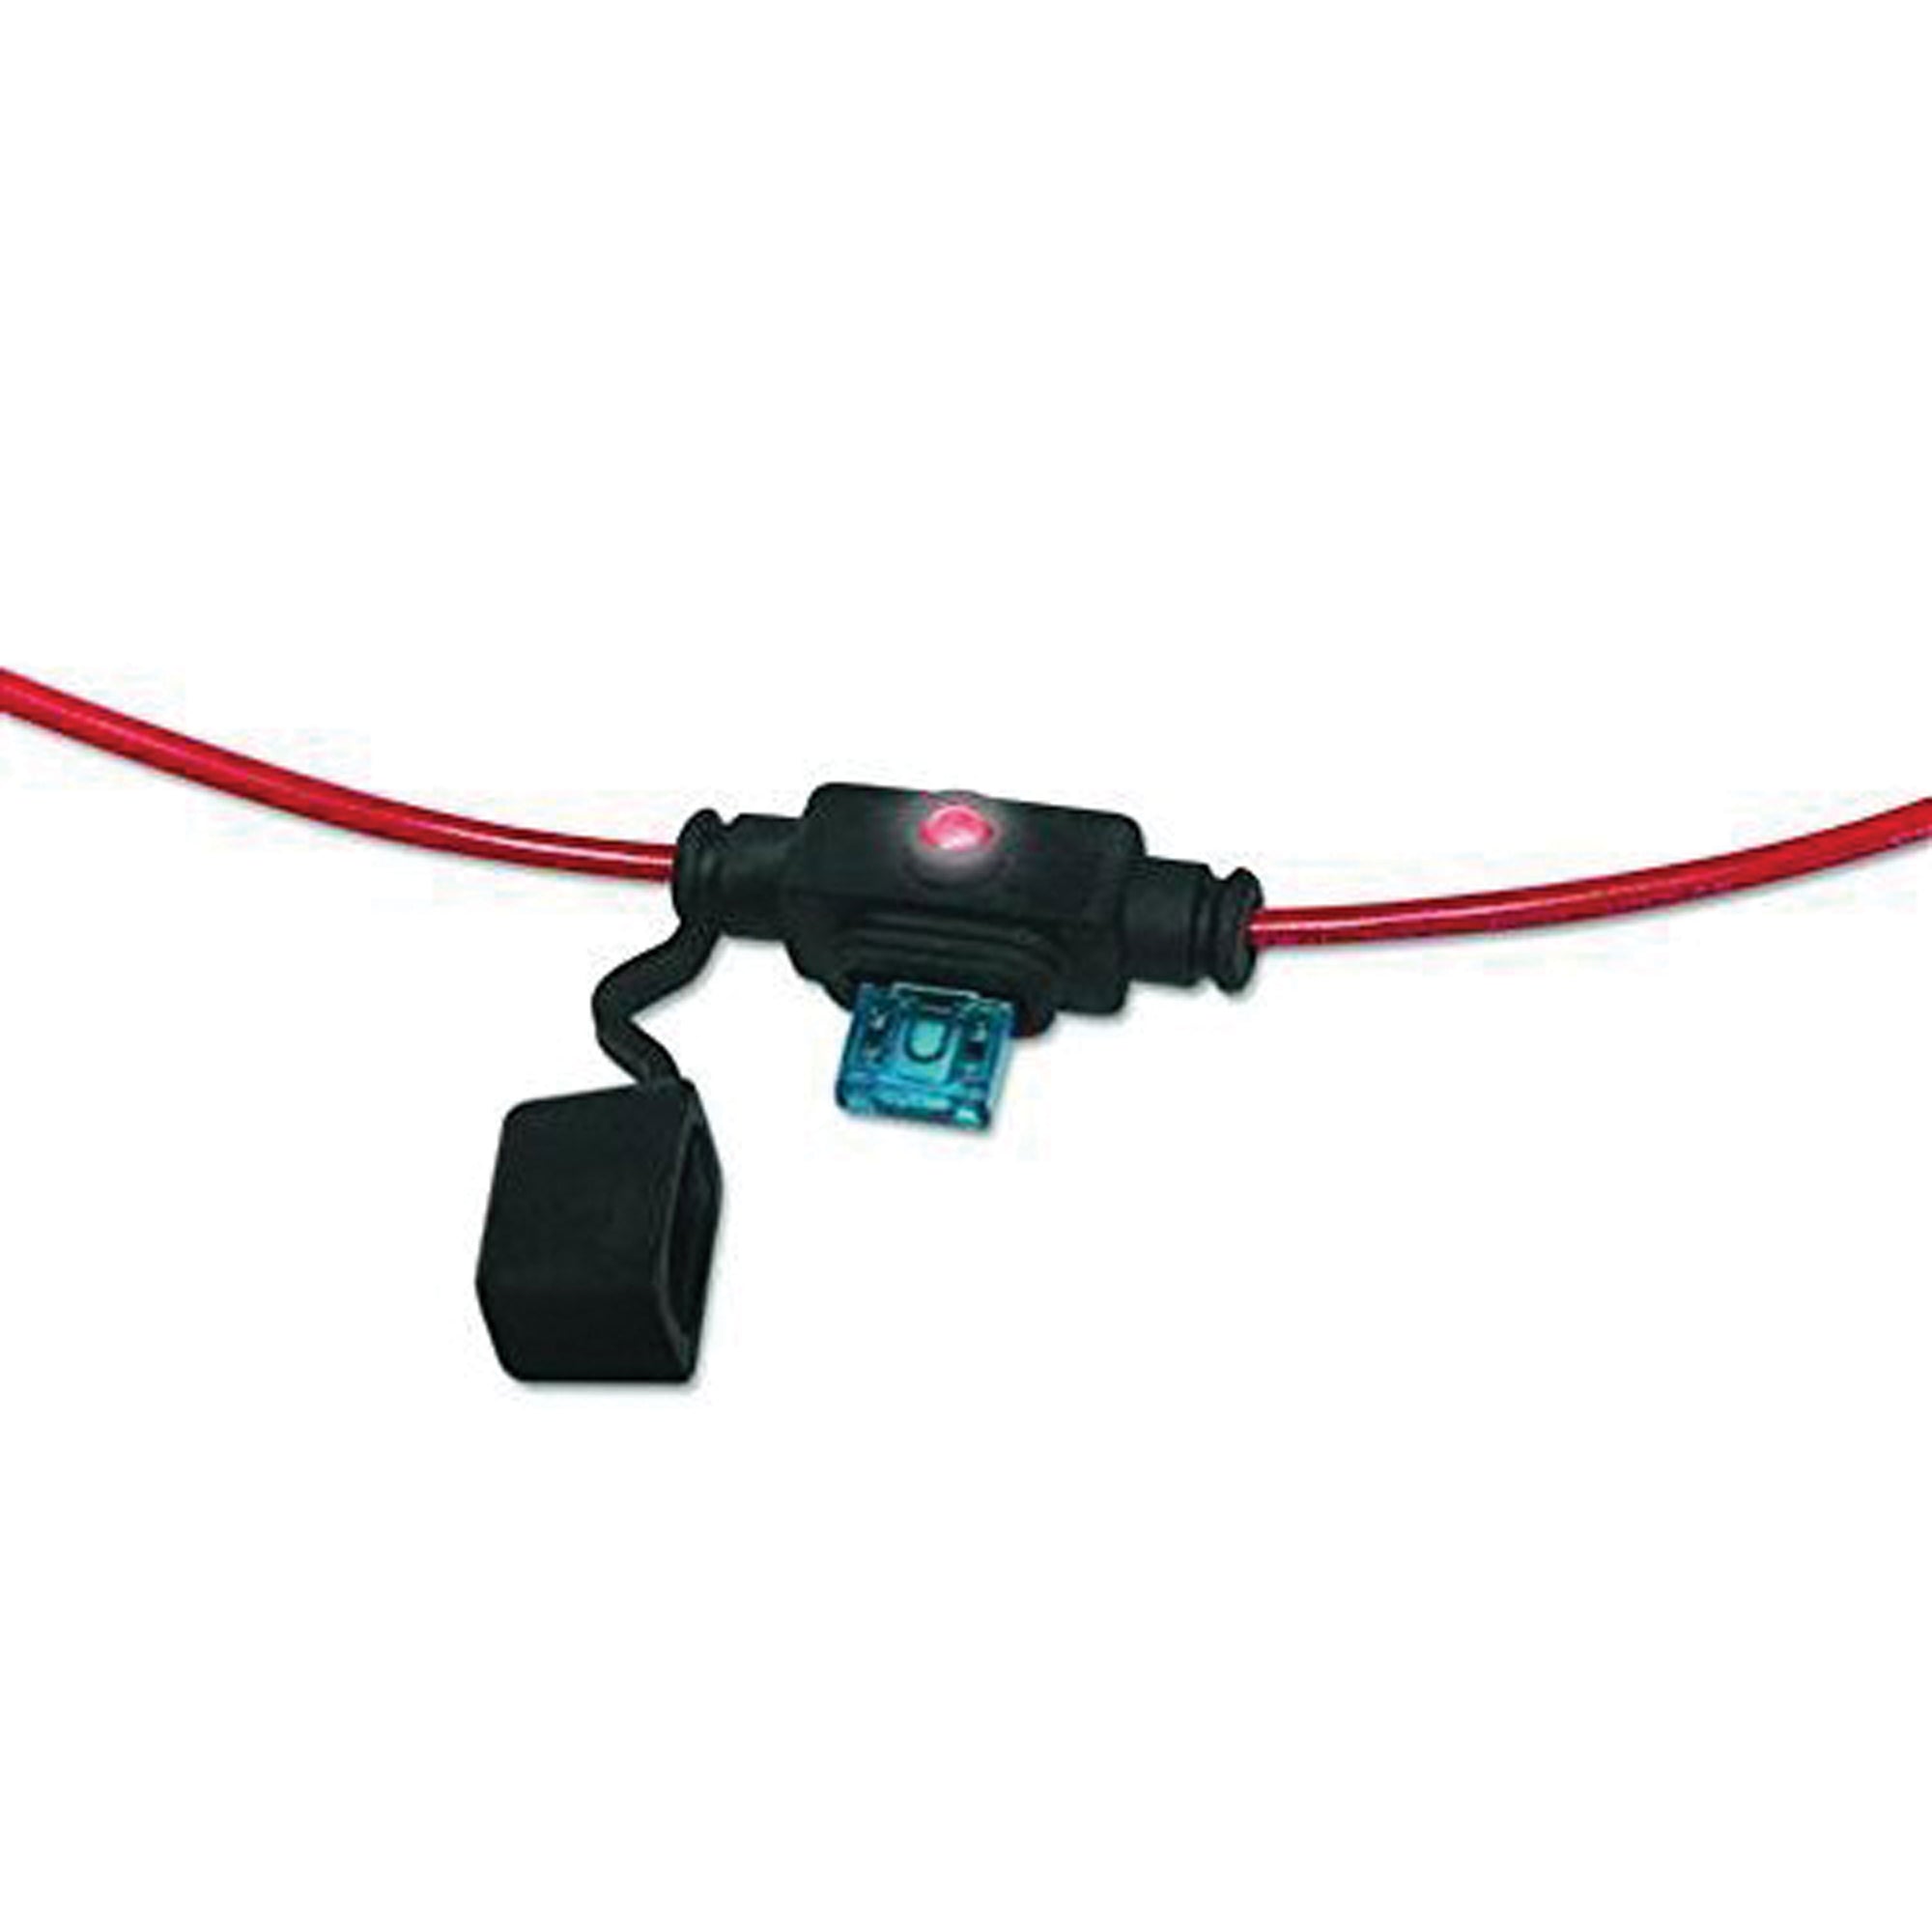 WirthCo 24410 MinBlade LED Fuse Holder with Water-Resistant Cover